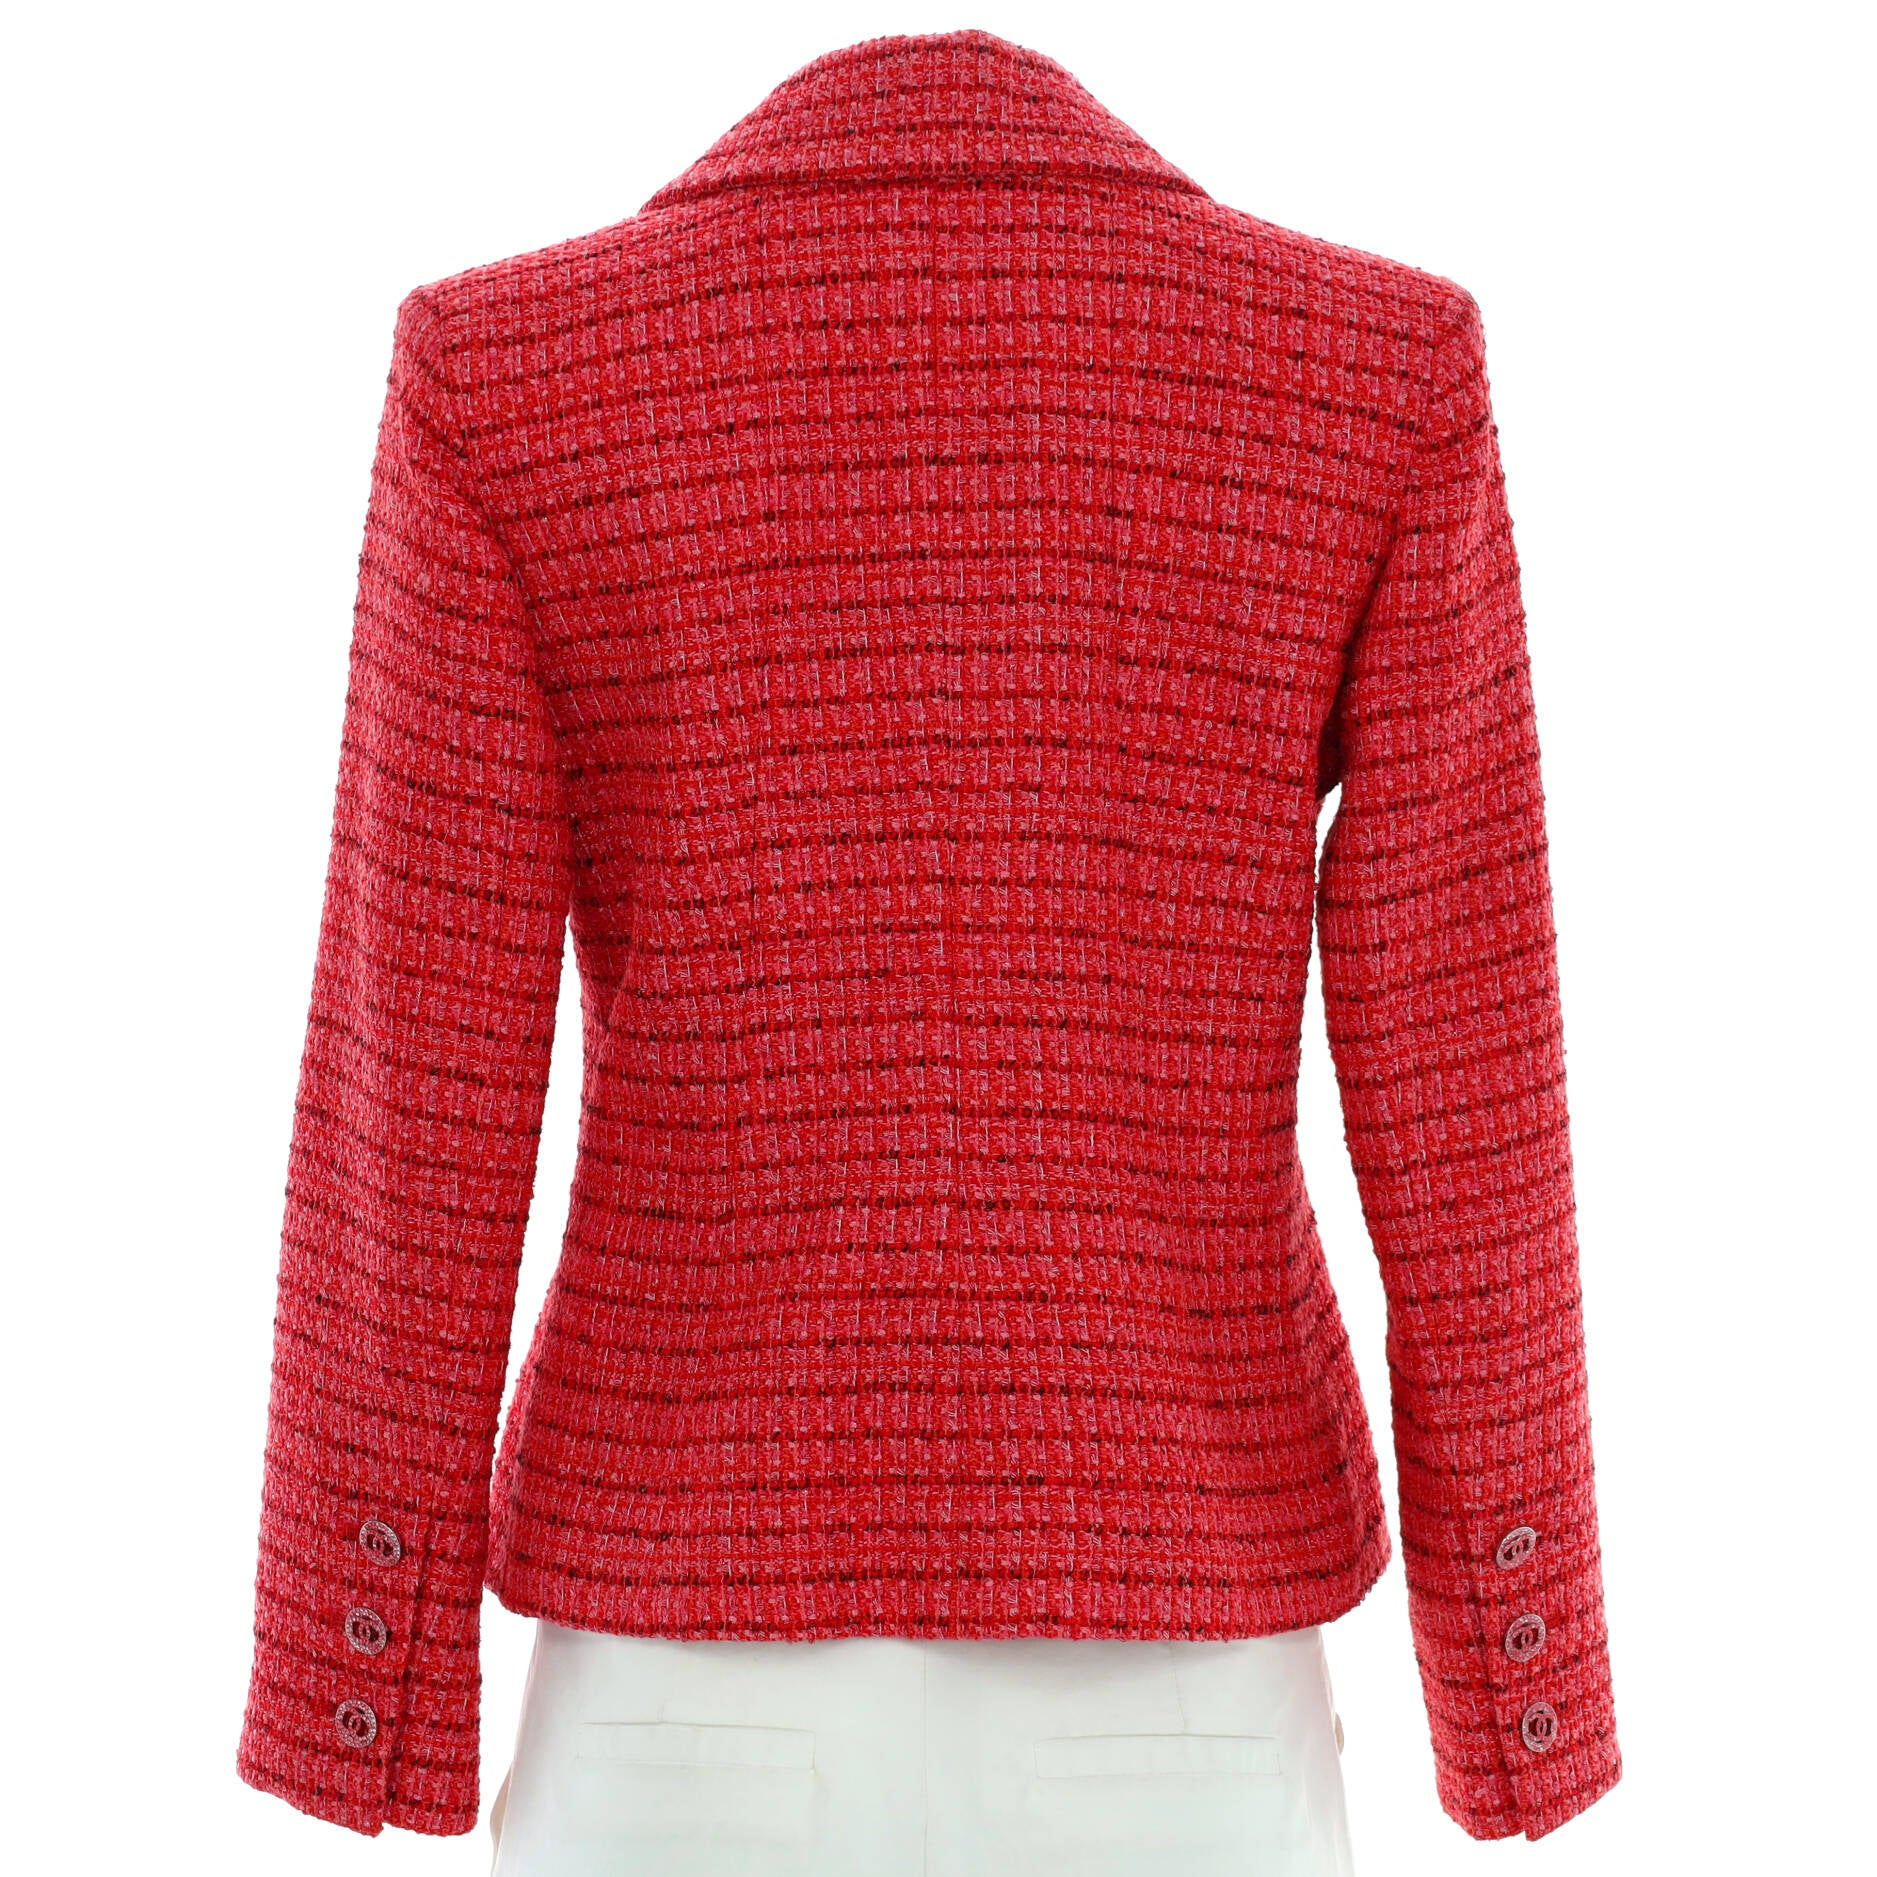 Chanel Pre-owned Notch Lapels Tweed Jacket - Navy Red